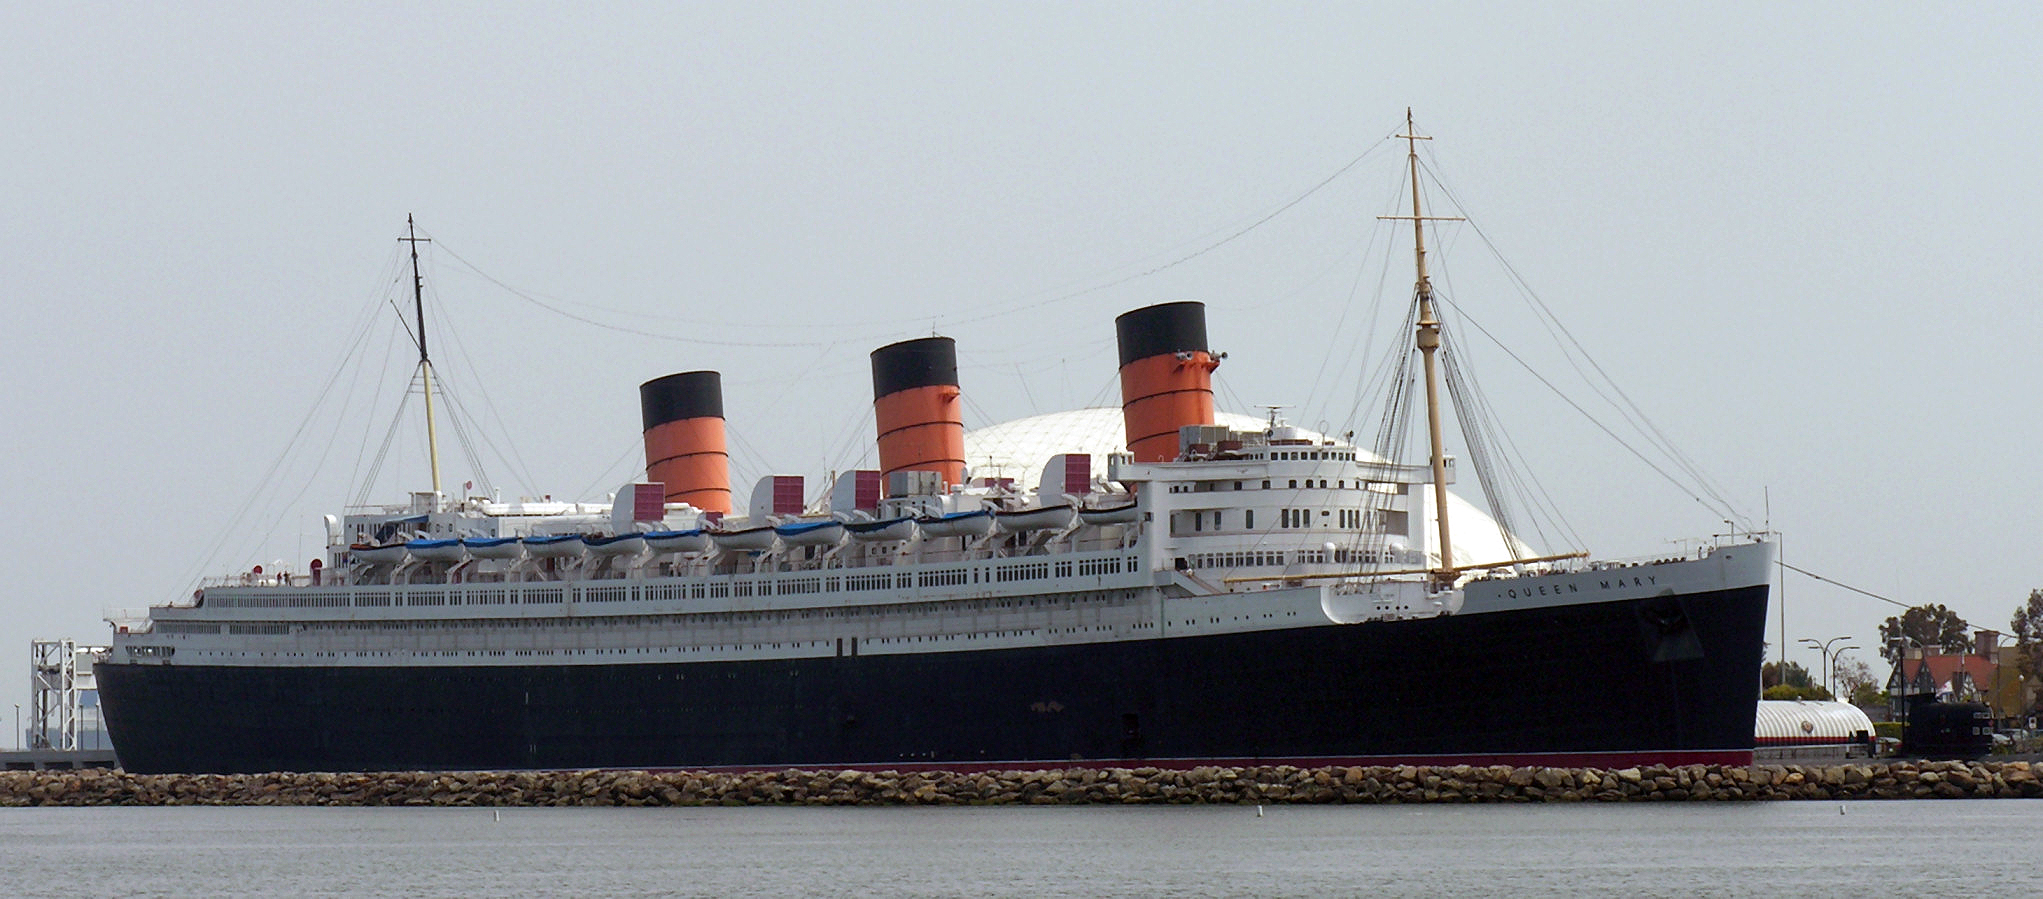 visit queen mary